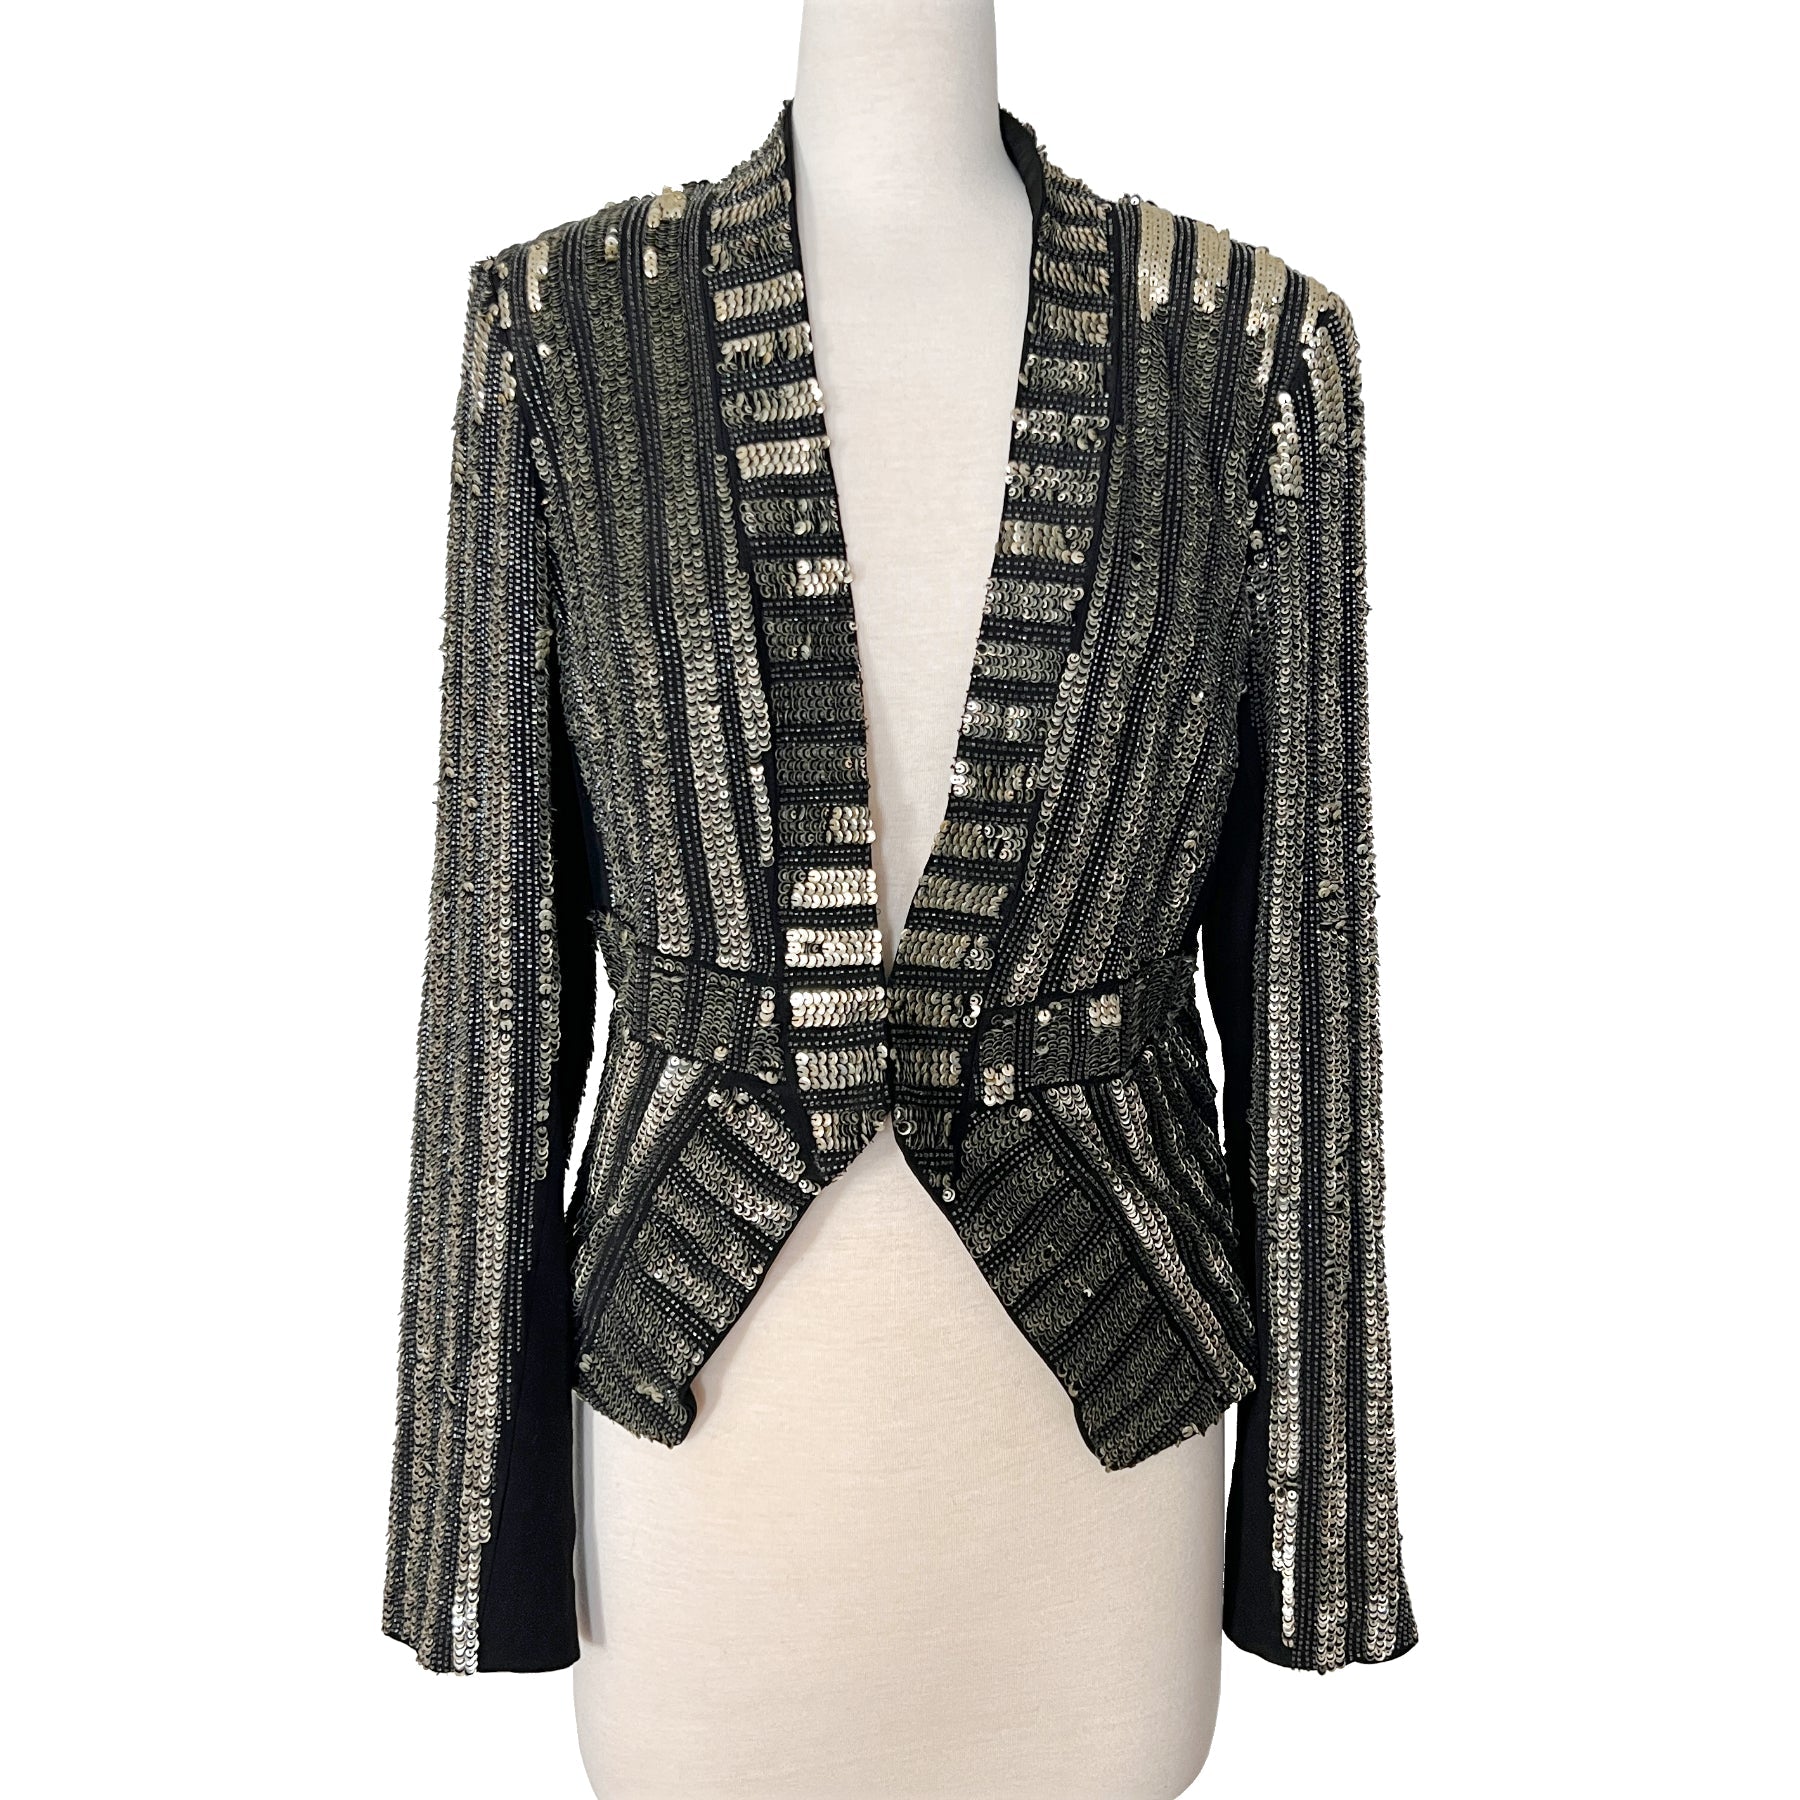 J. Mendel Paris Couture Silver Sequin Cropped Embroidered Evening Jacket Blazer